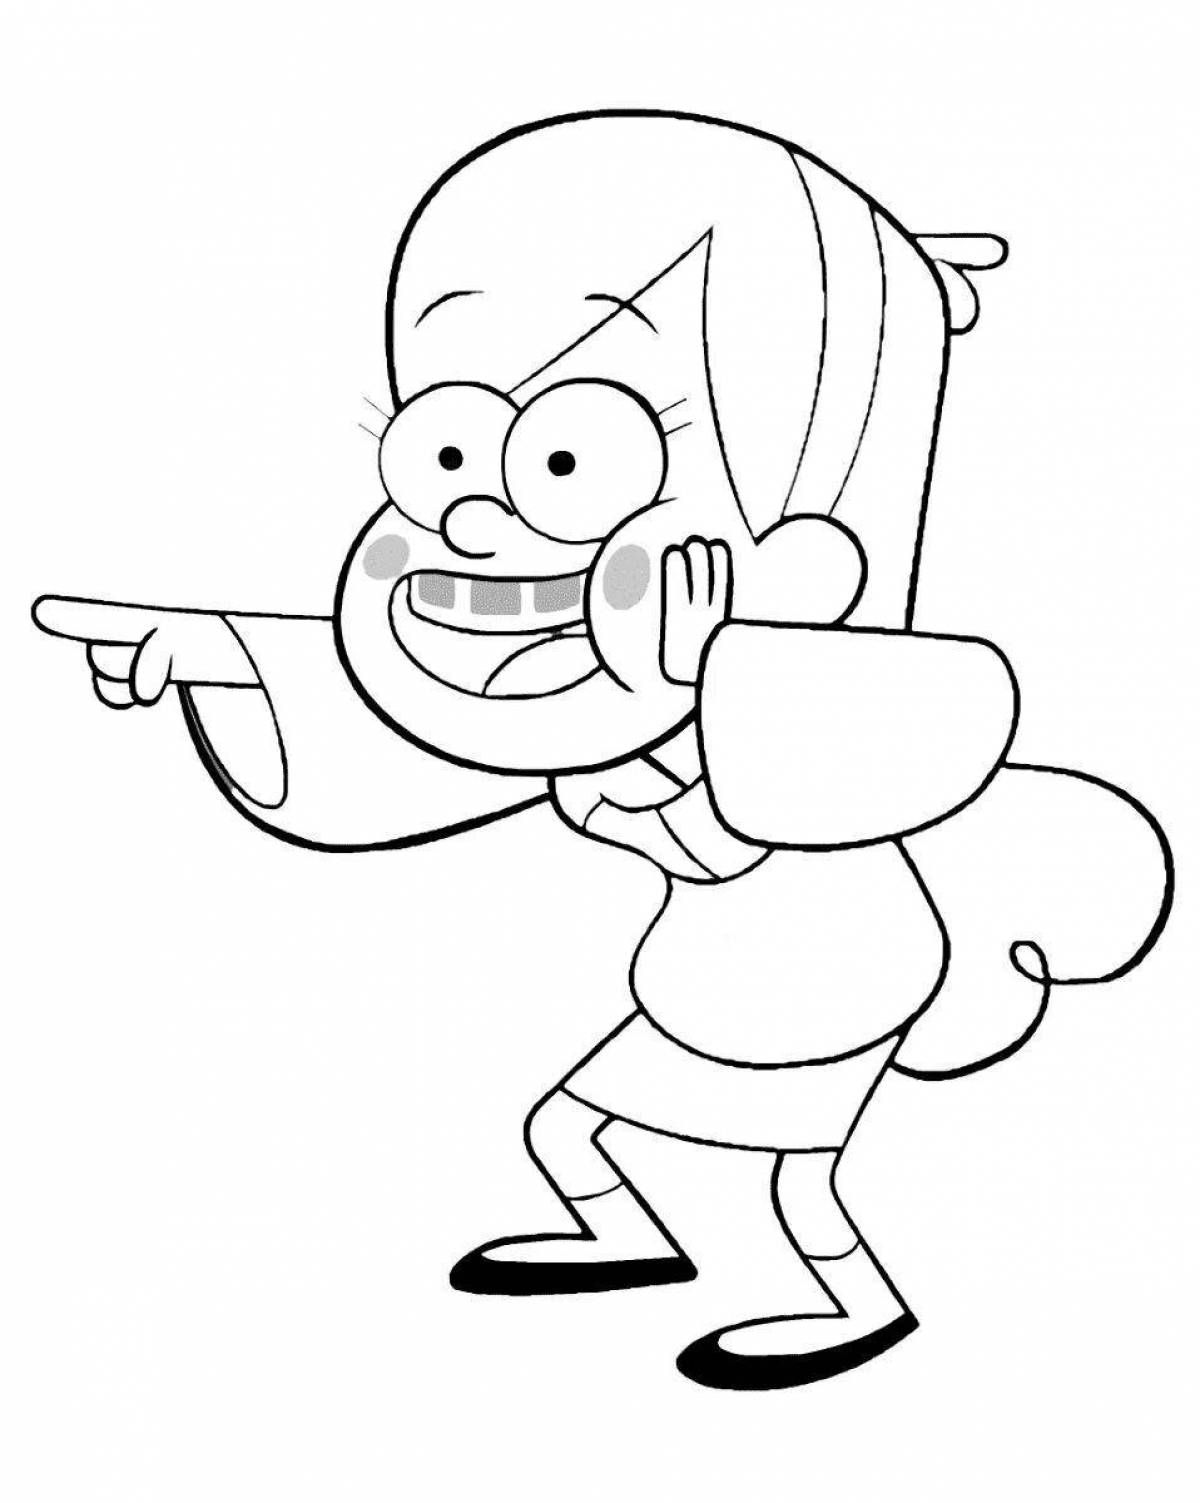 Charming mabel coloring book